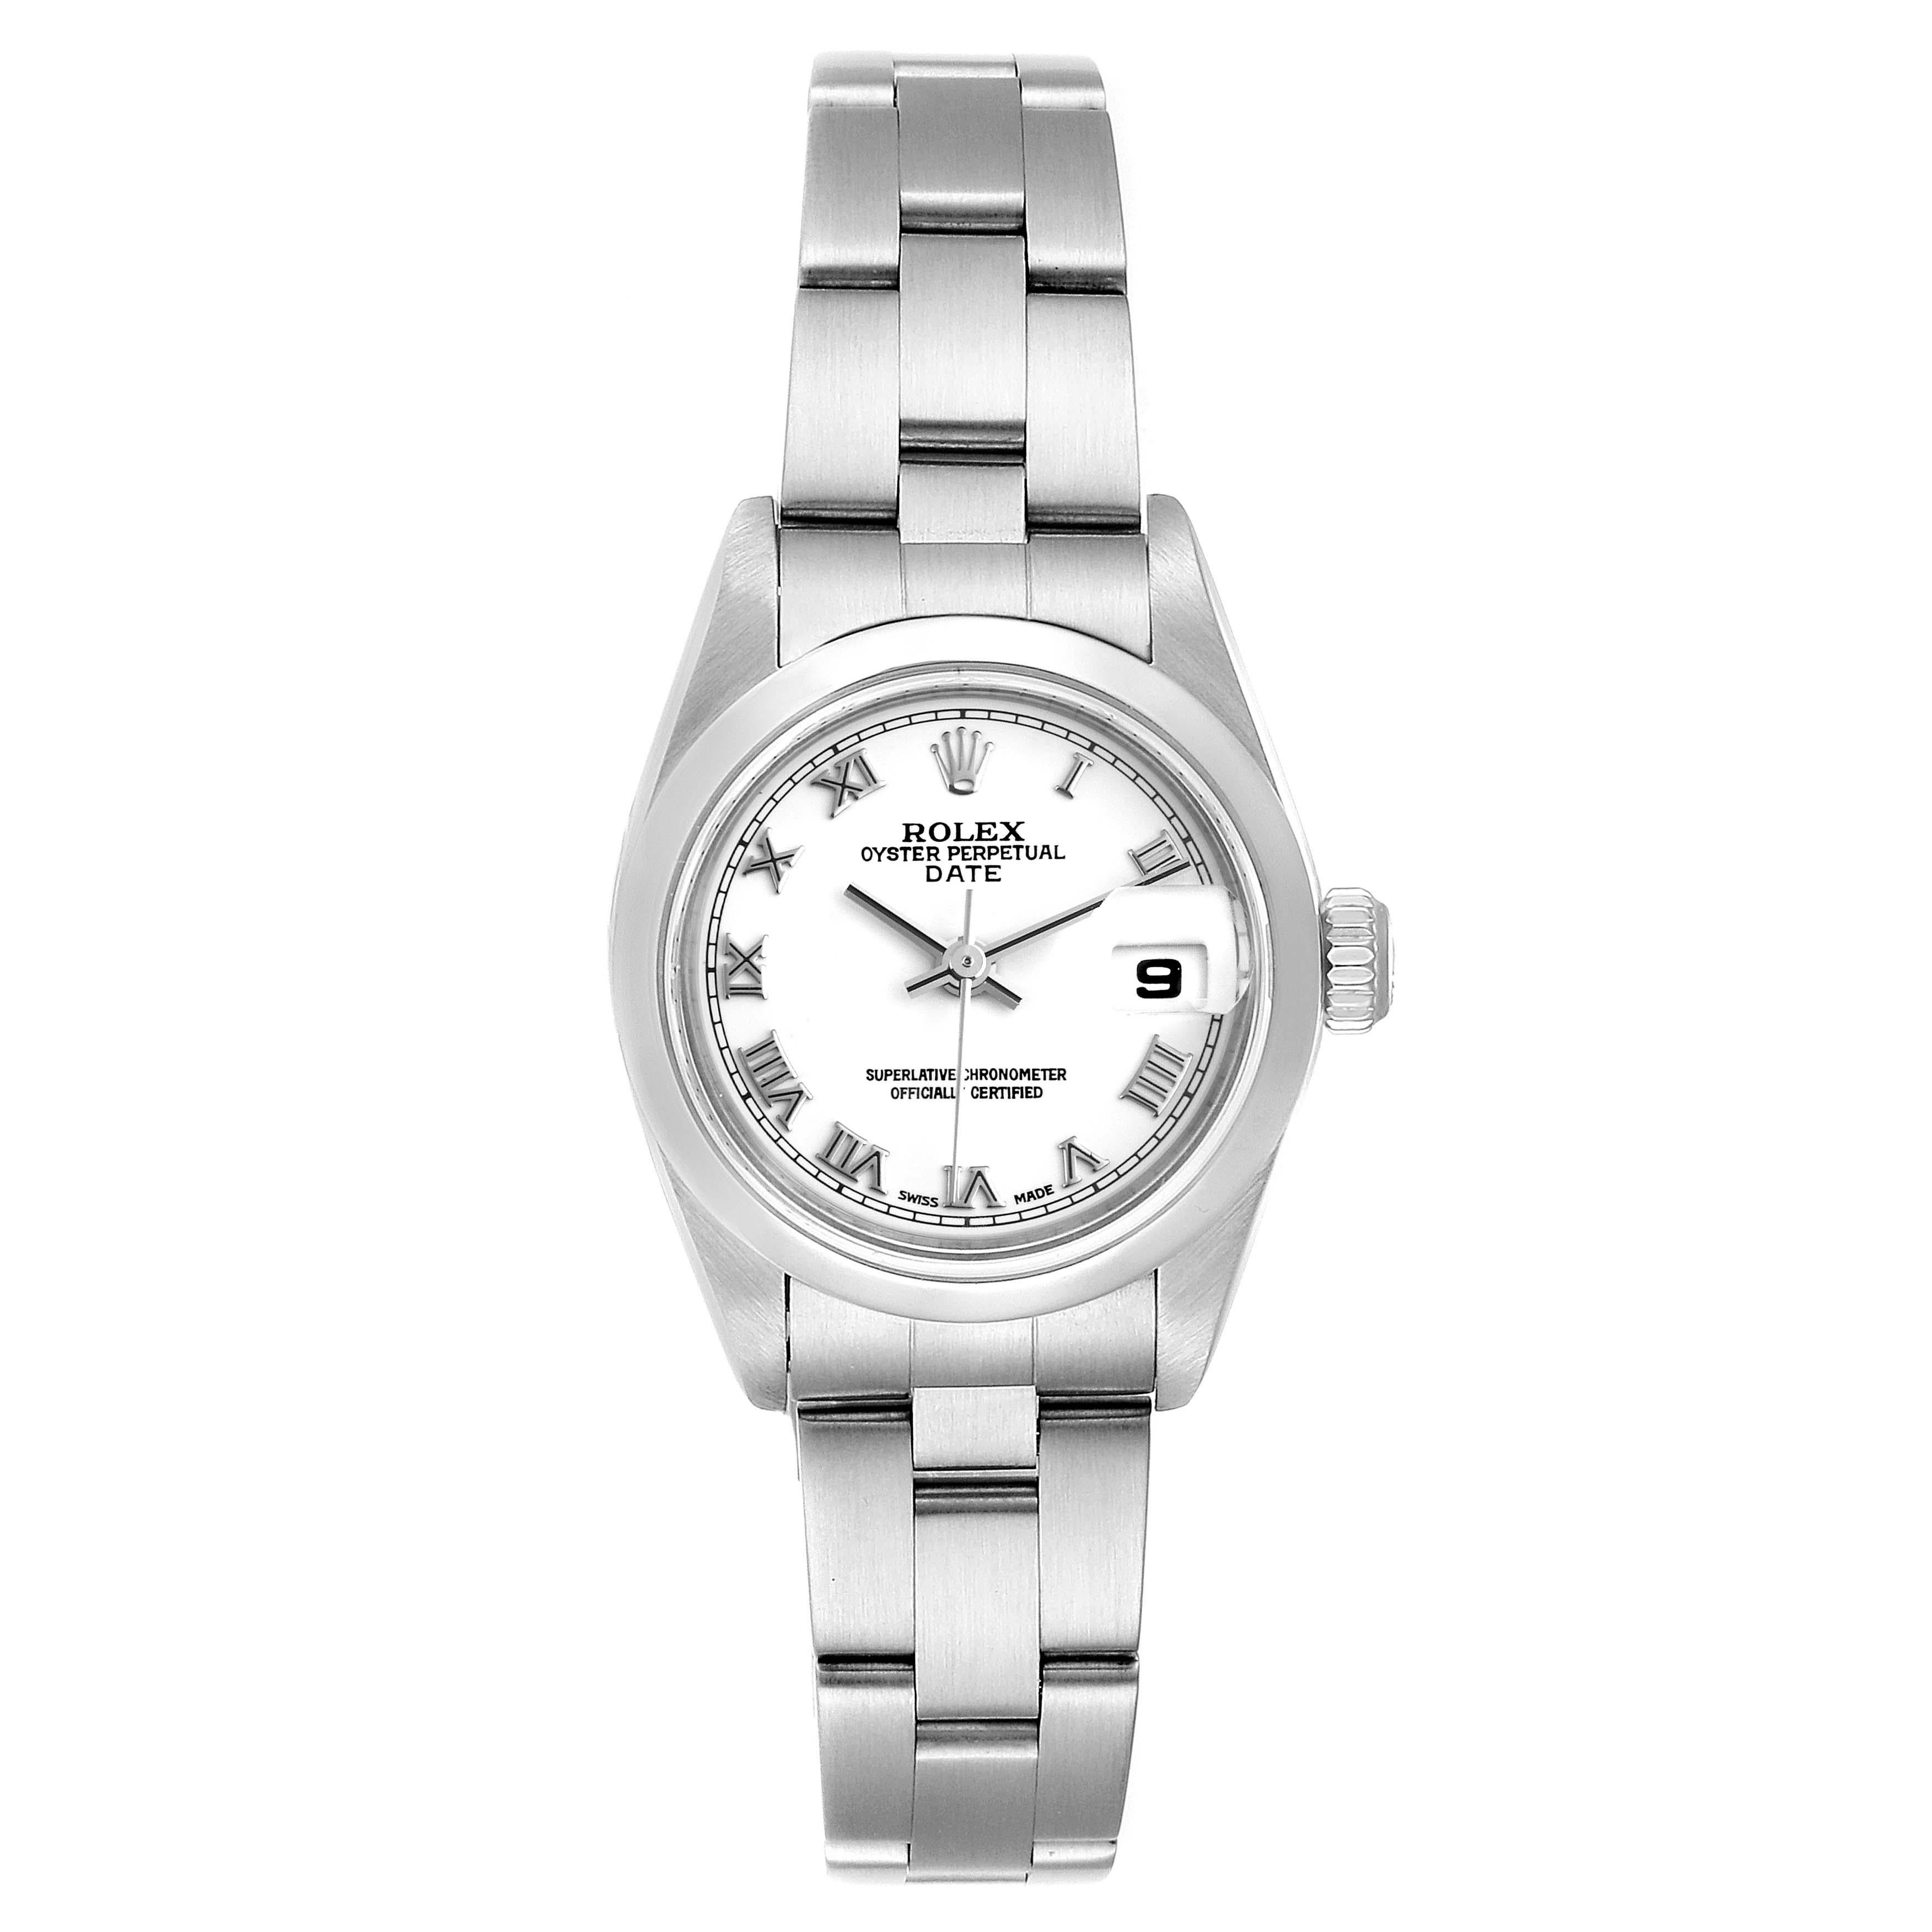 Rolex Date White Dial Domed Bezel Steel Ladies Watch 79160 Box Papers. Officially certified chronometer self-winding movement. Stainless steel oyster case 26 mm in diameter. Rolex logo on a crown. Stainless steel smooth bezel. Scratch resistant